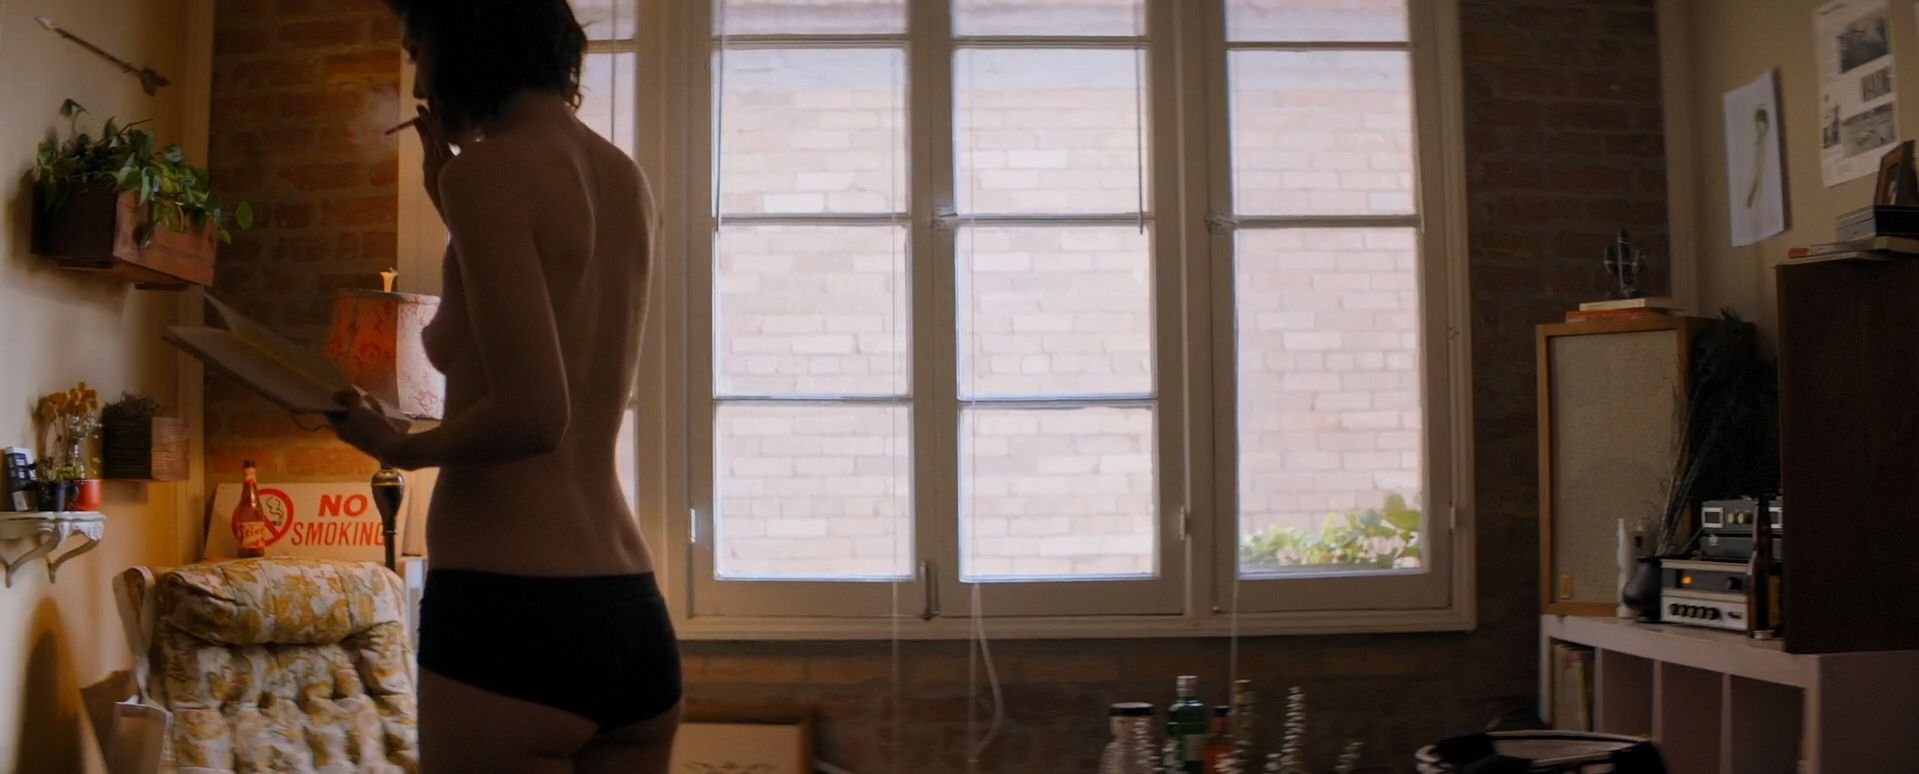 Mary Elizabeth Winstead Nude - All About Nina (15 Pics + GIFs & Video)